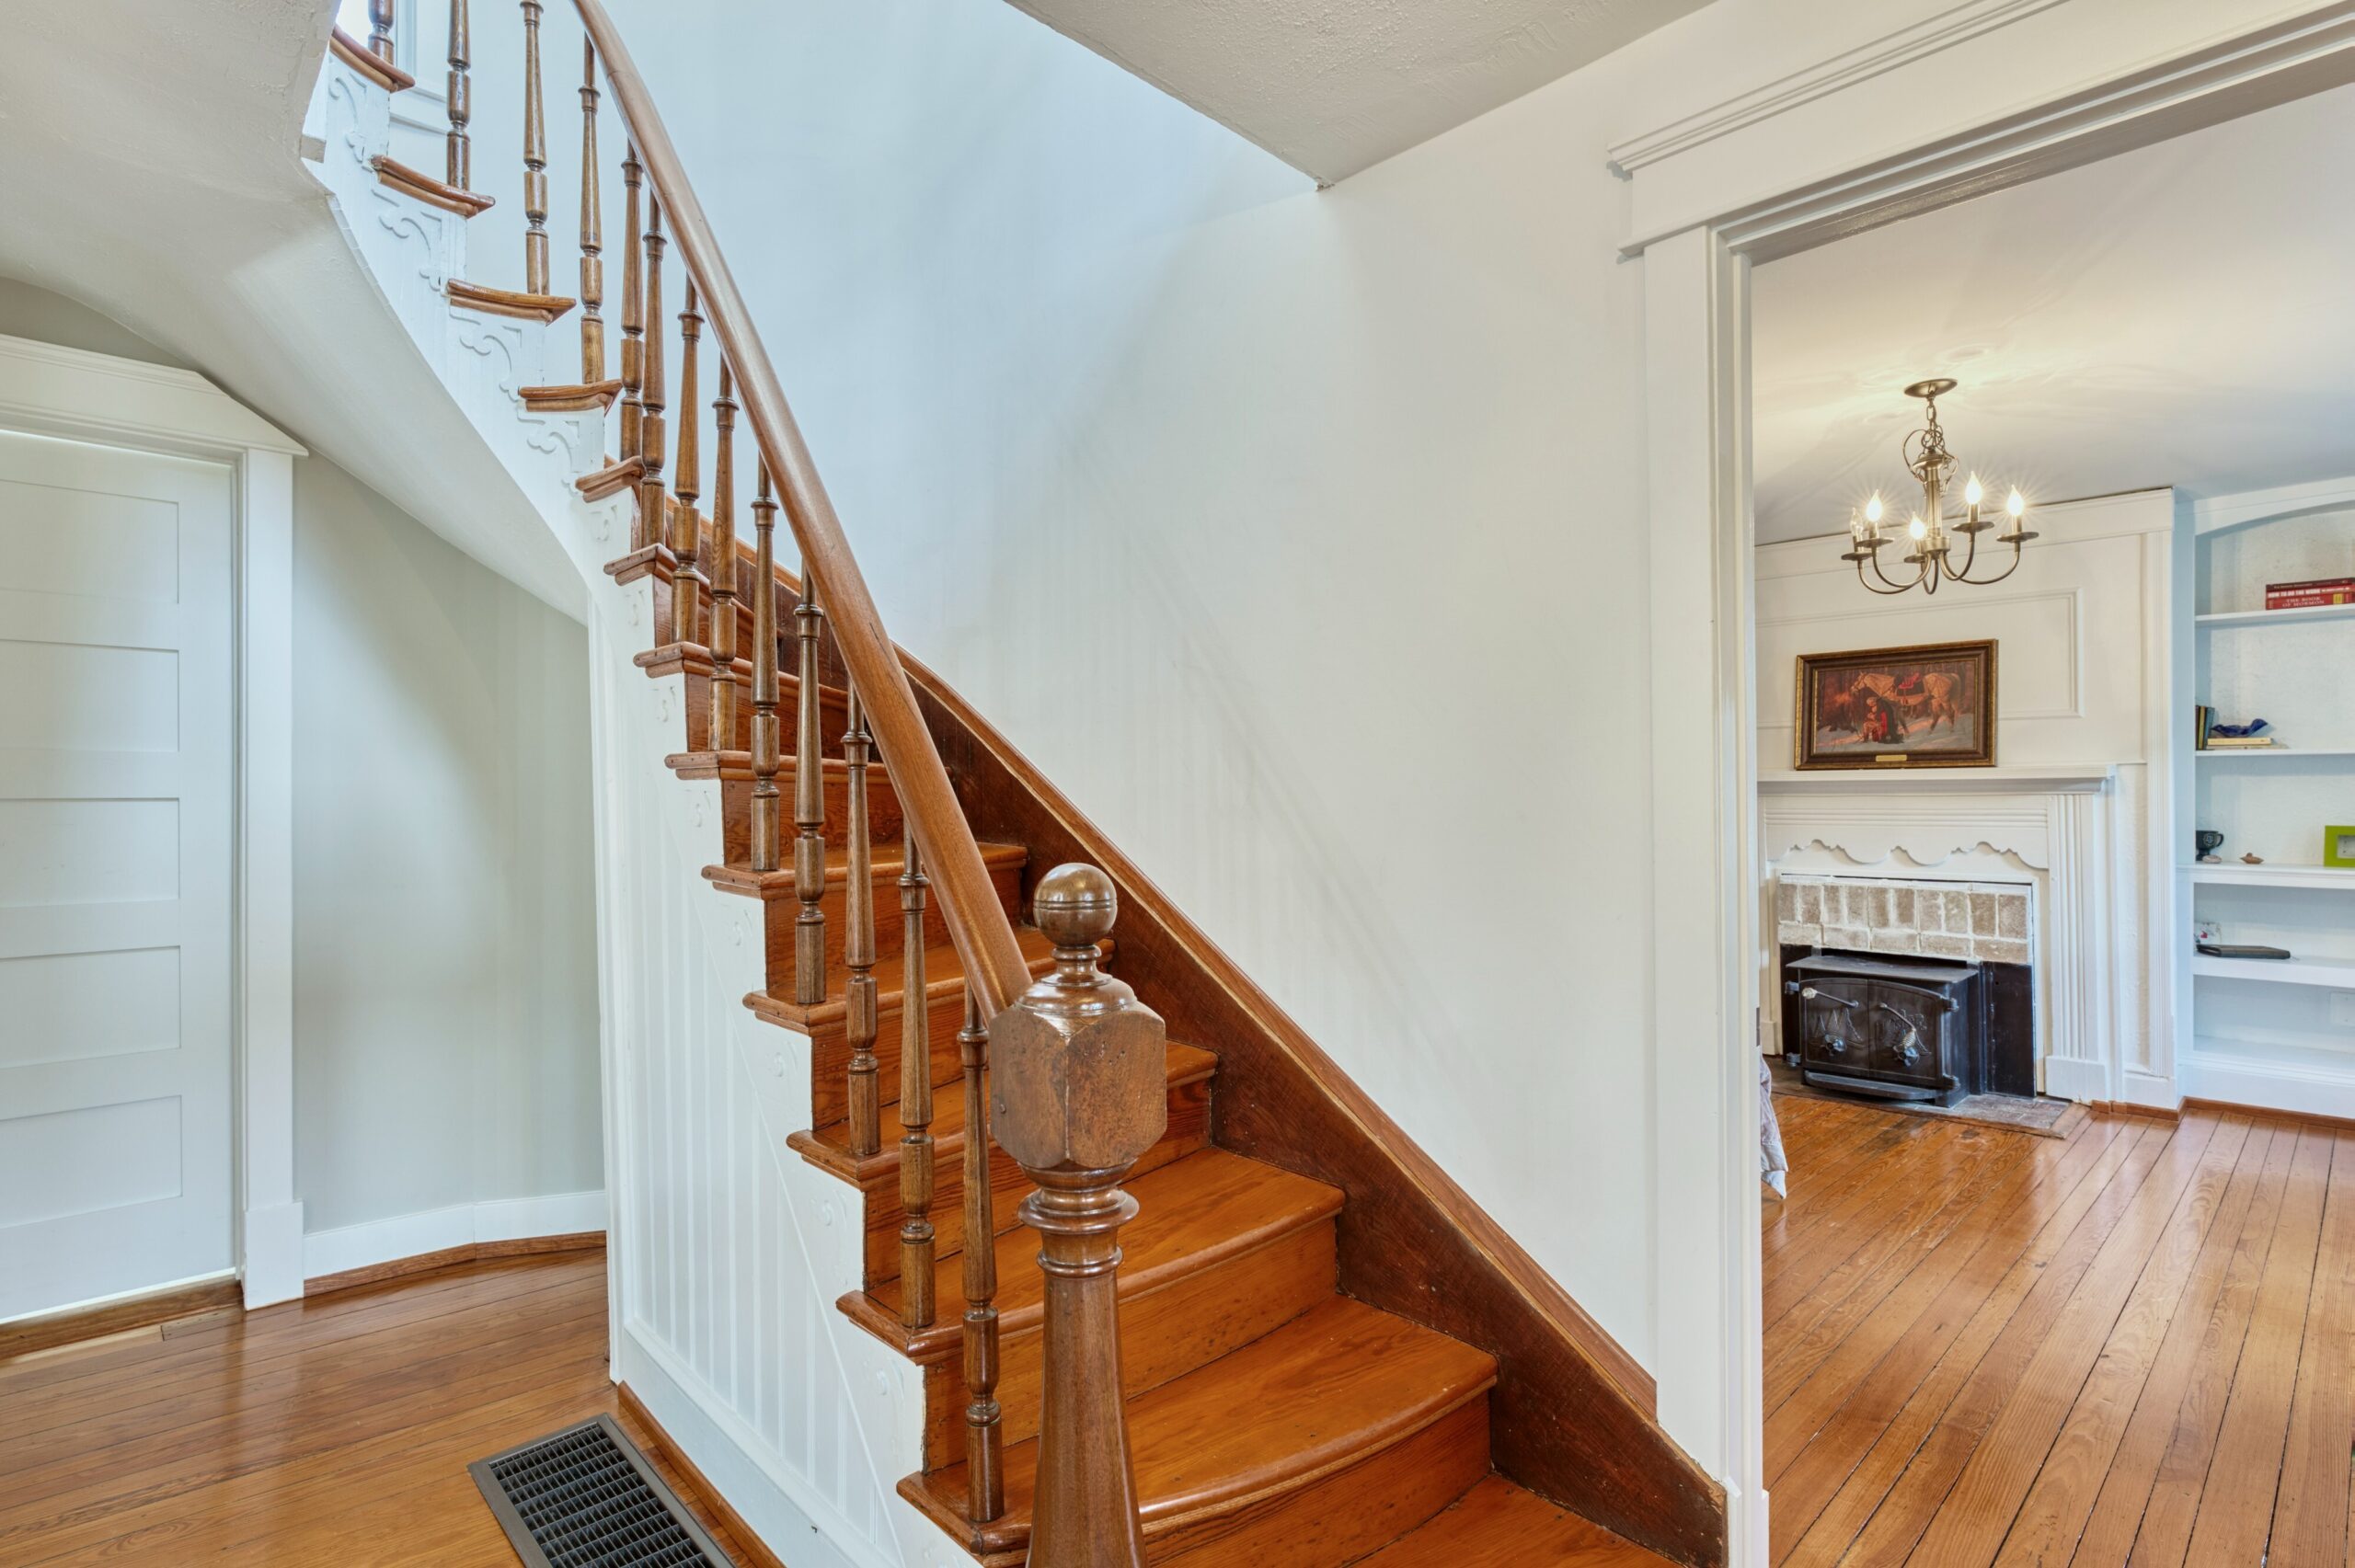 Dramatic staircase inside the front door of historic home in Hamilton, VA with hardwood floors